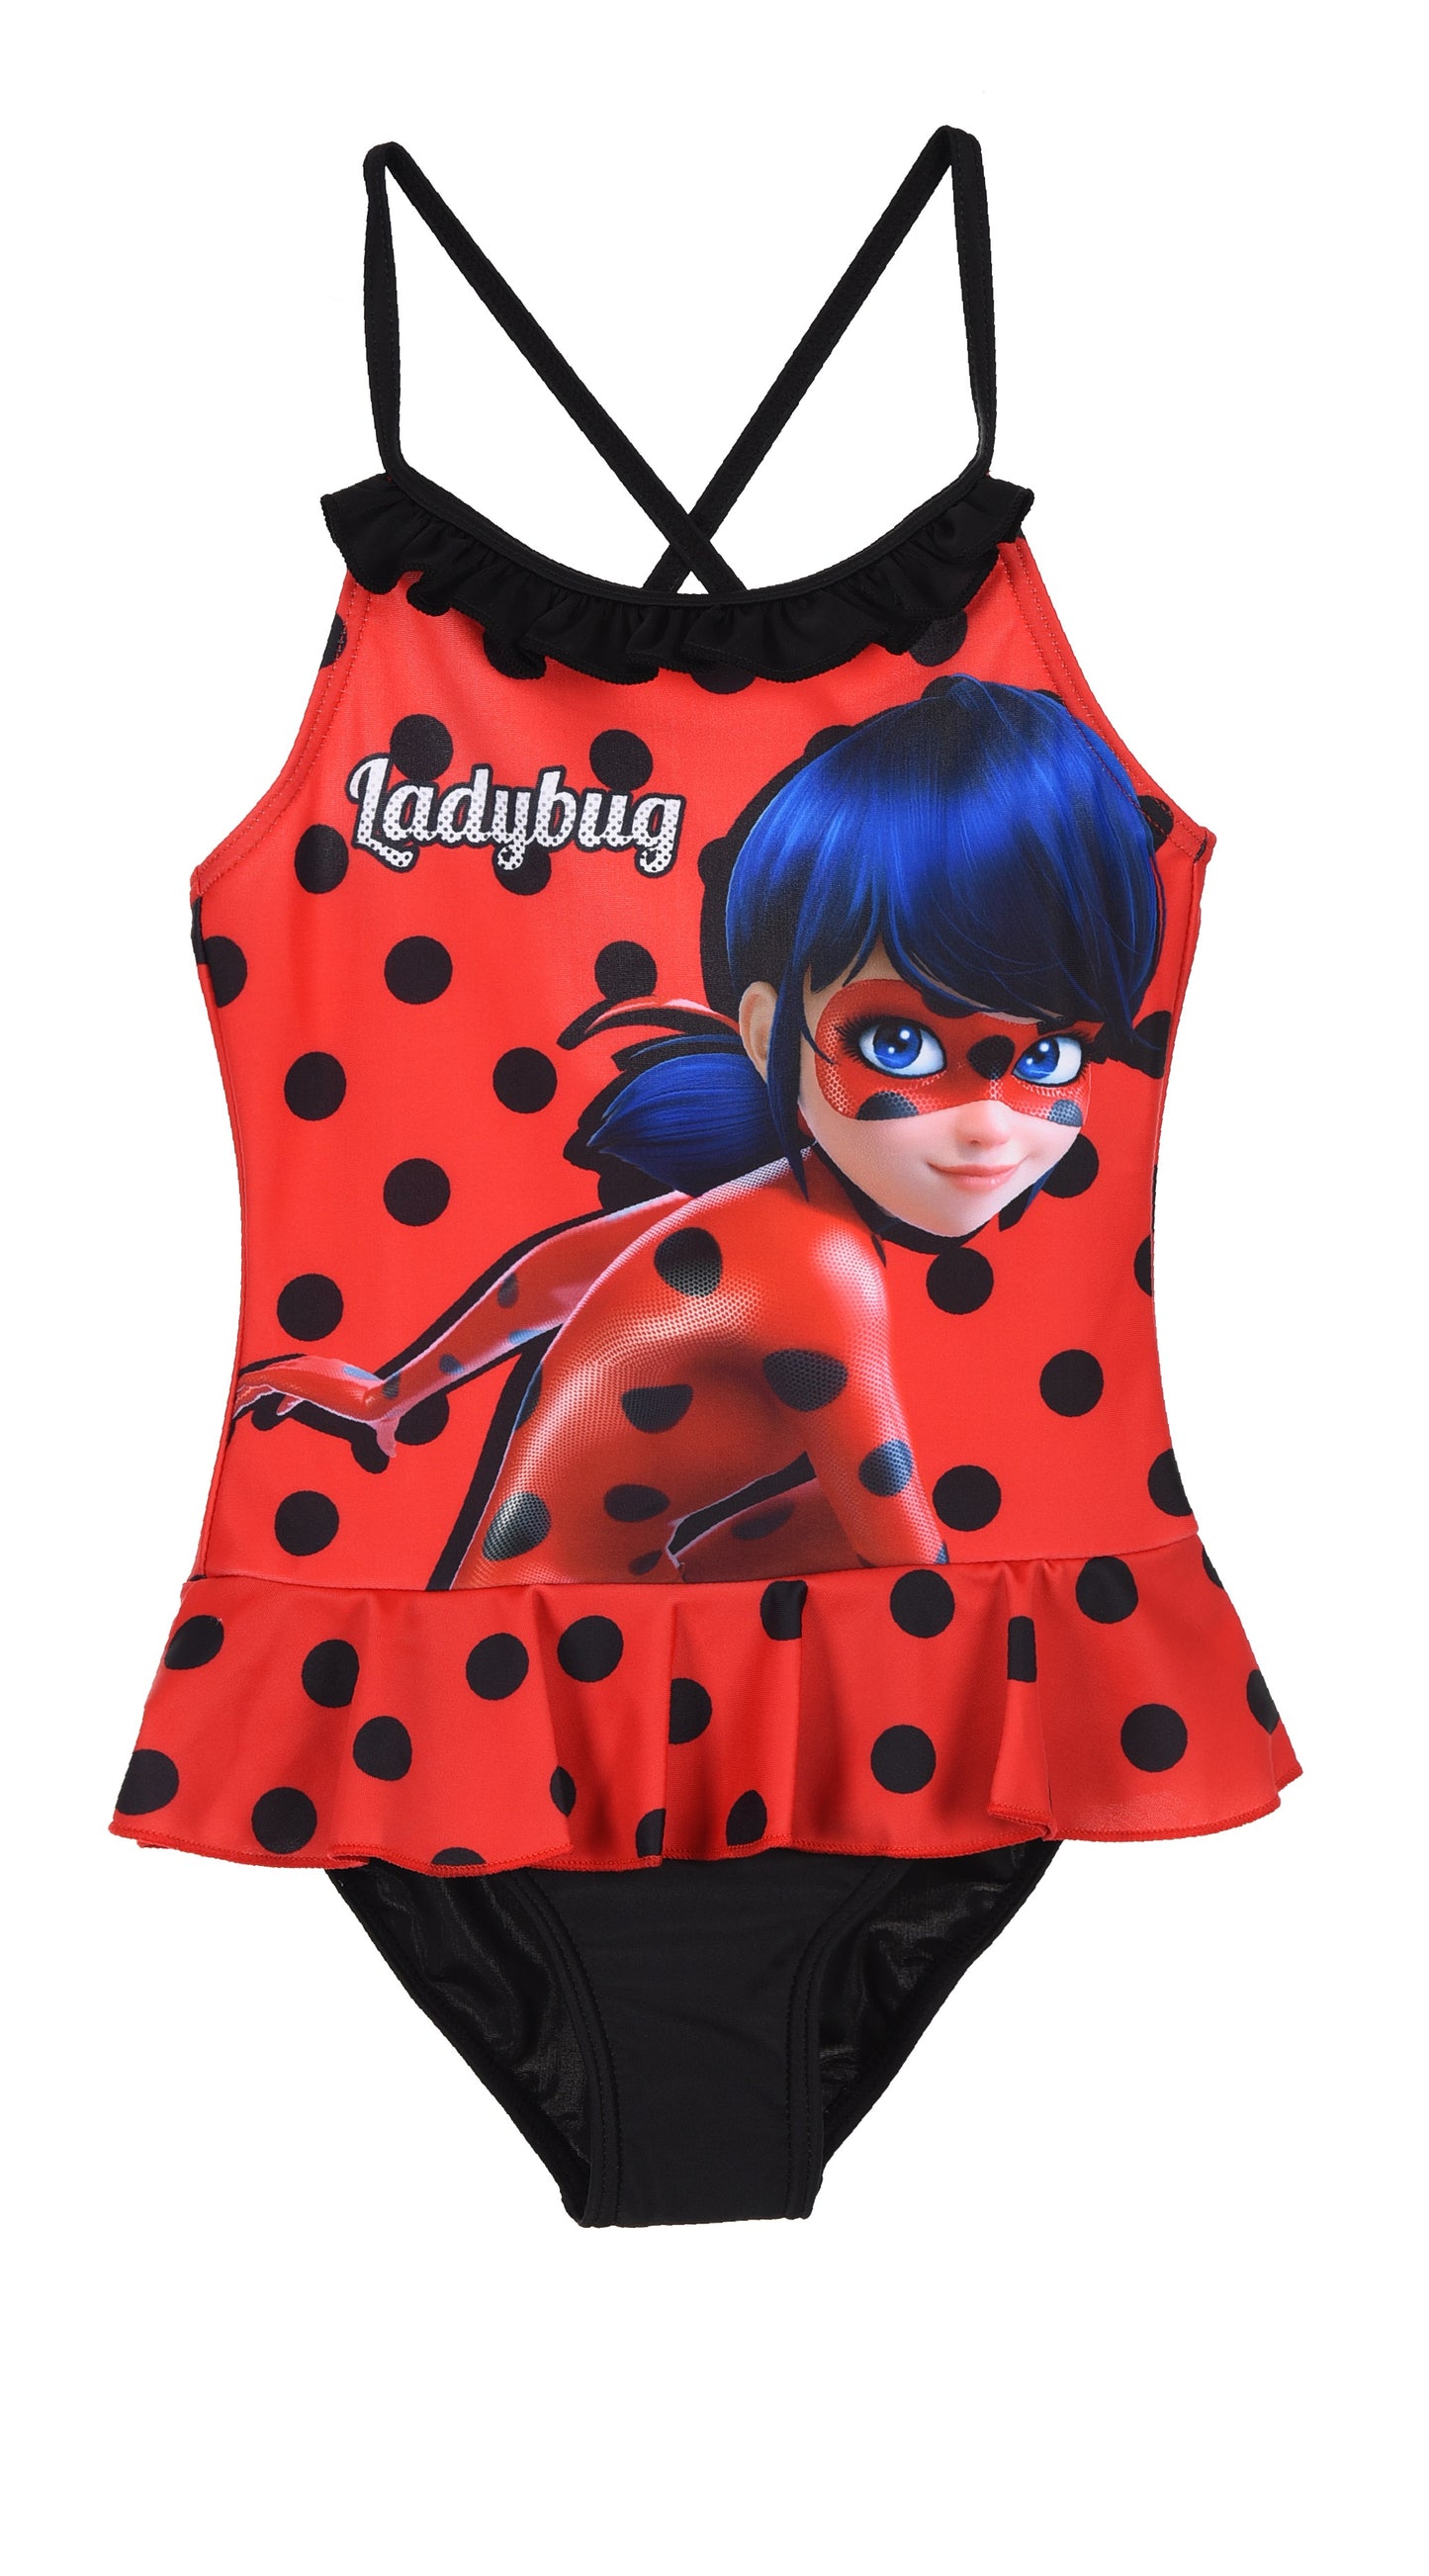 Miraculous Tales Of Ladybug & Cat Noir Red Swimming Costume, Ages 4, 5, 6, 8, 100% Polyester, Official Merchandise